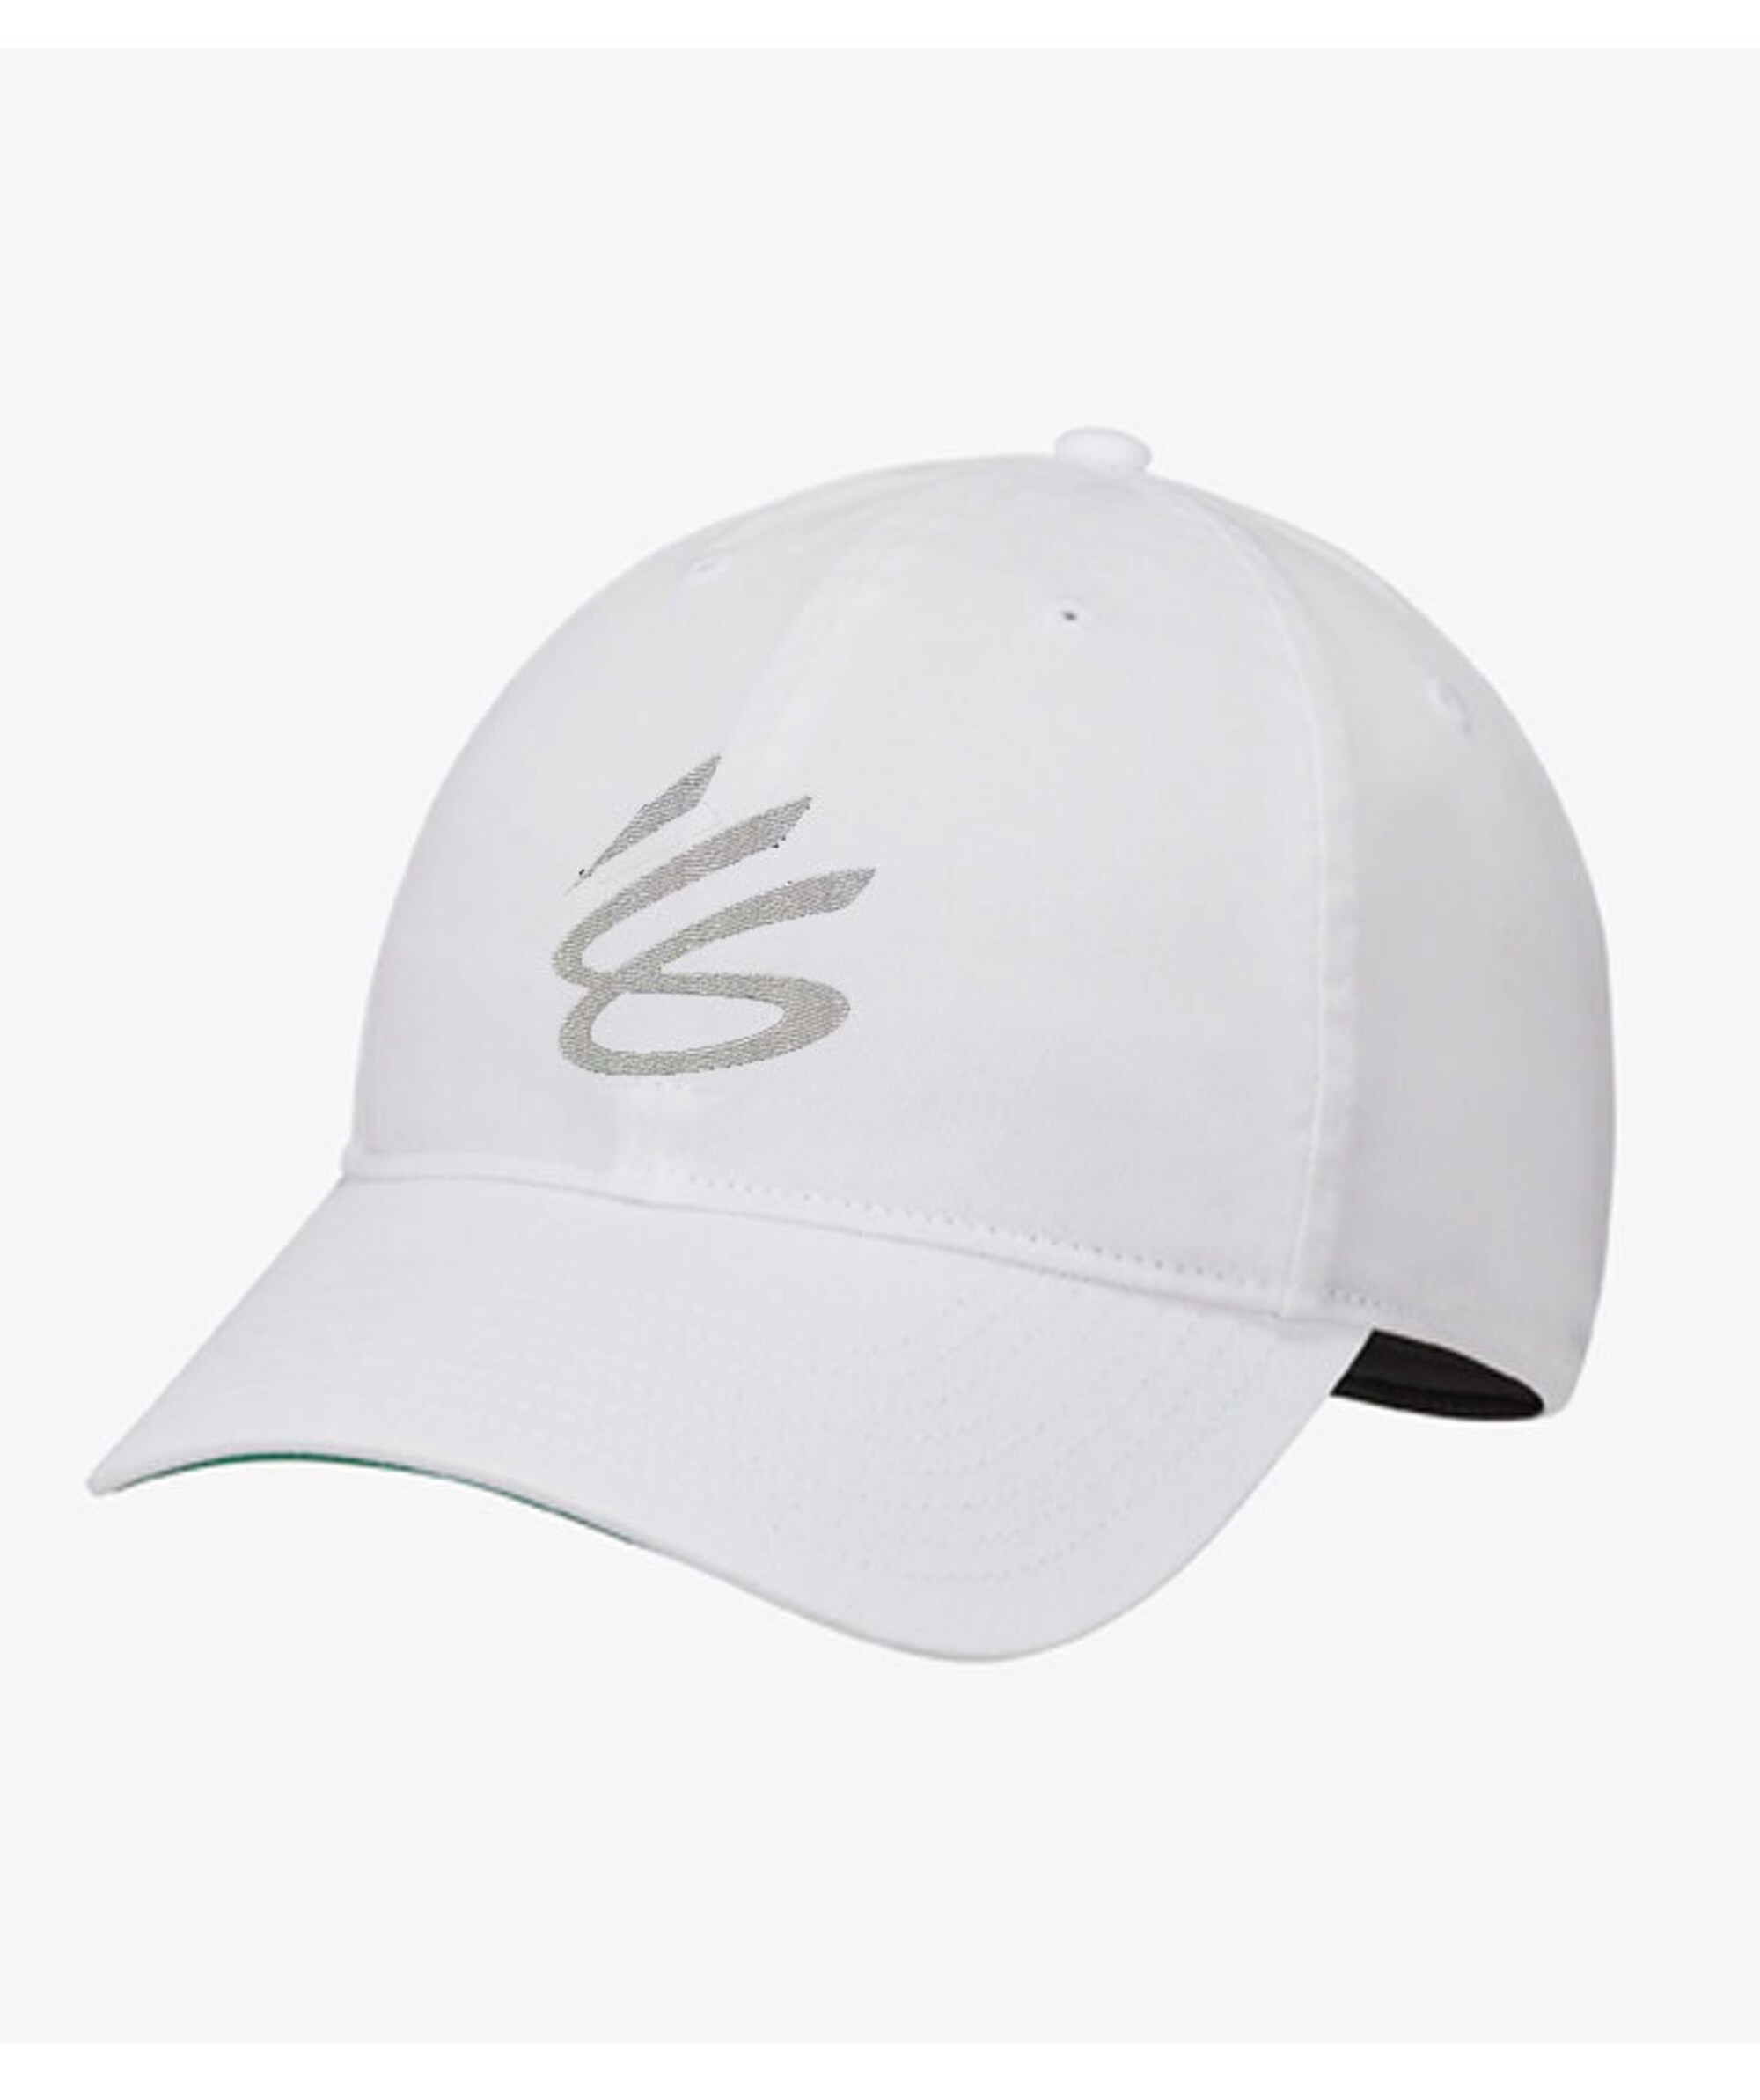 Stephen Curry Dad Hat, Men's Curry Golf Hat, Unisex Curry Golf Hat